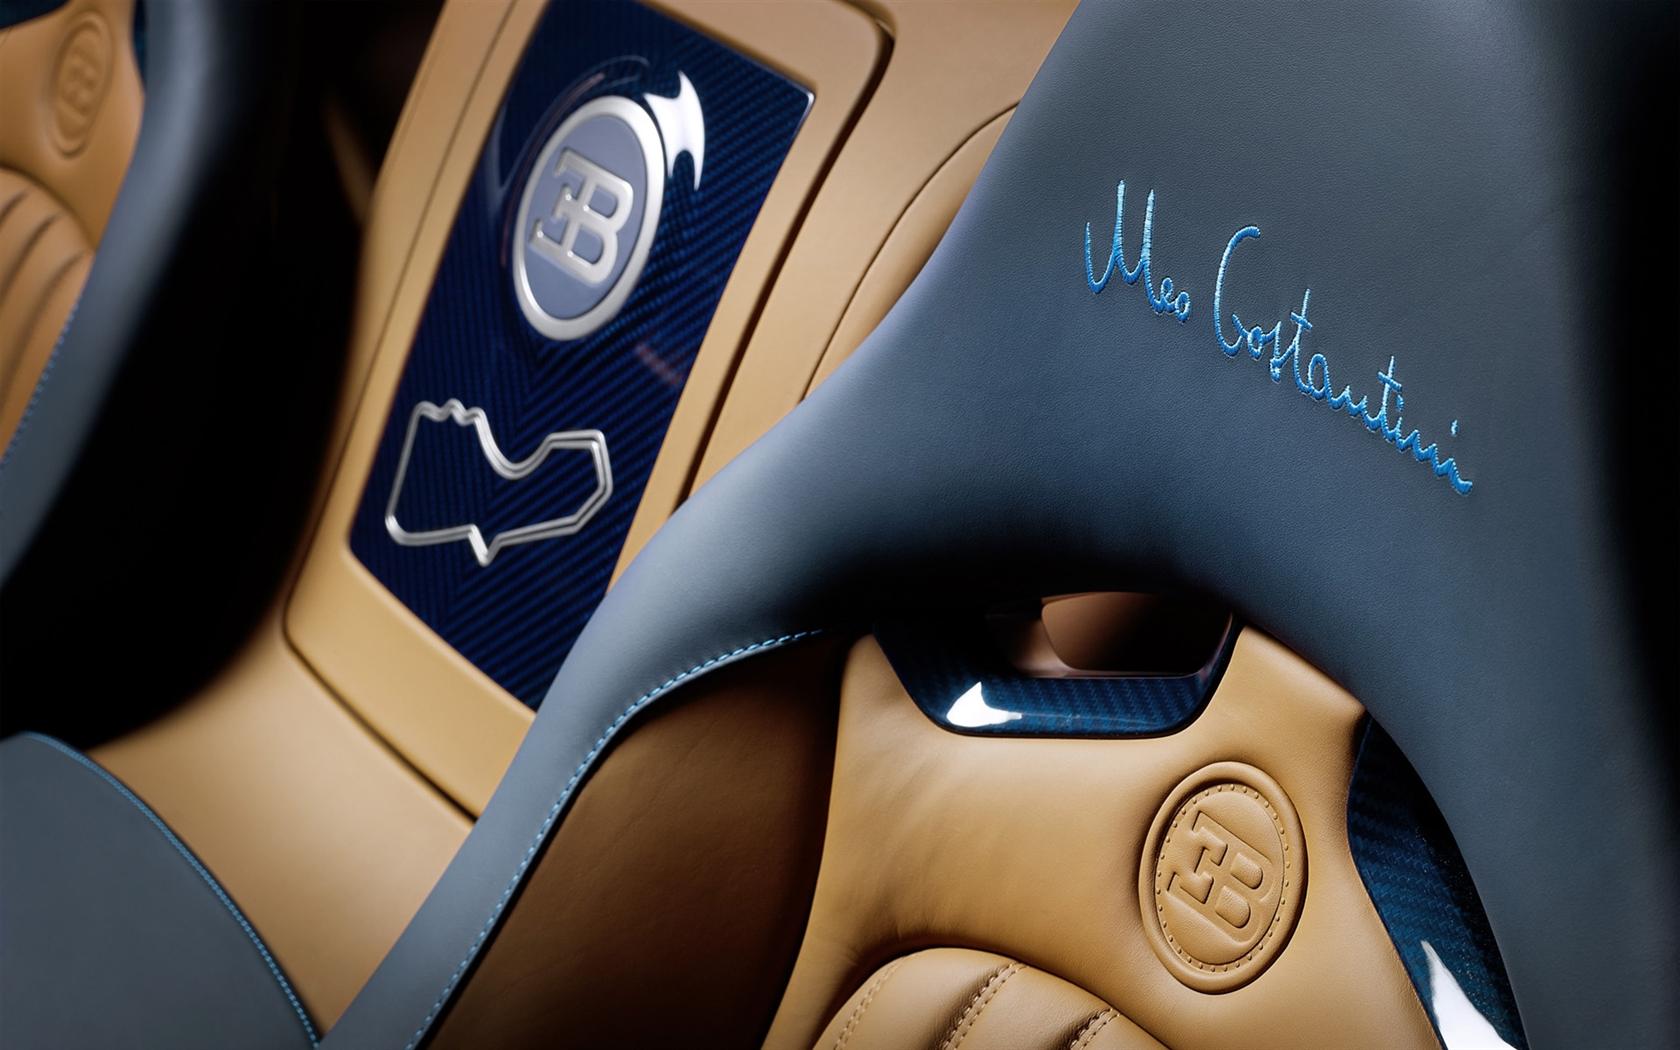 The Absolute Height Of Luxury: The 2013 Bugatti Veyron Meo Costantini